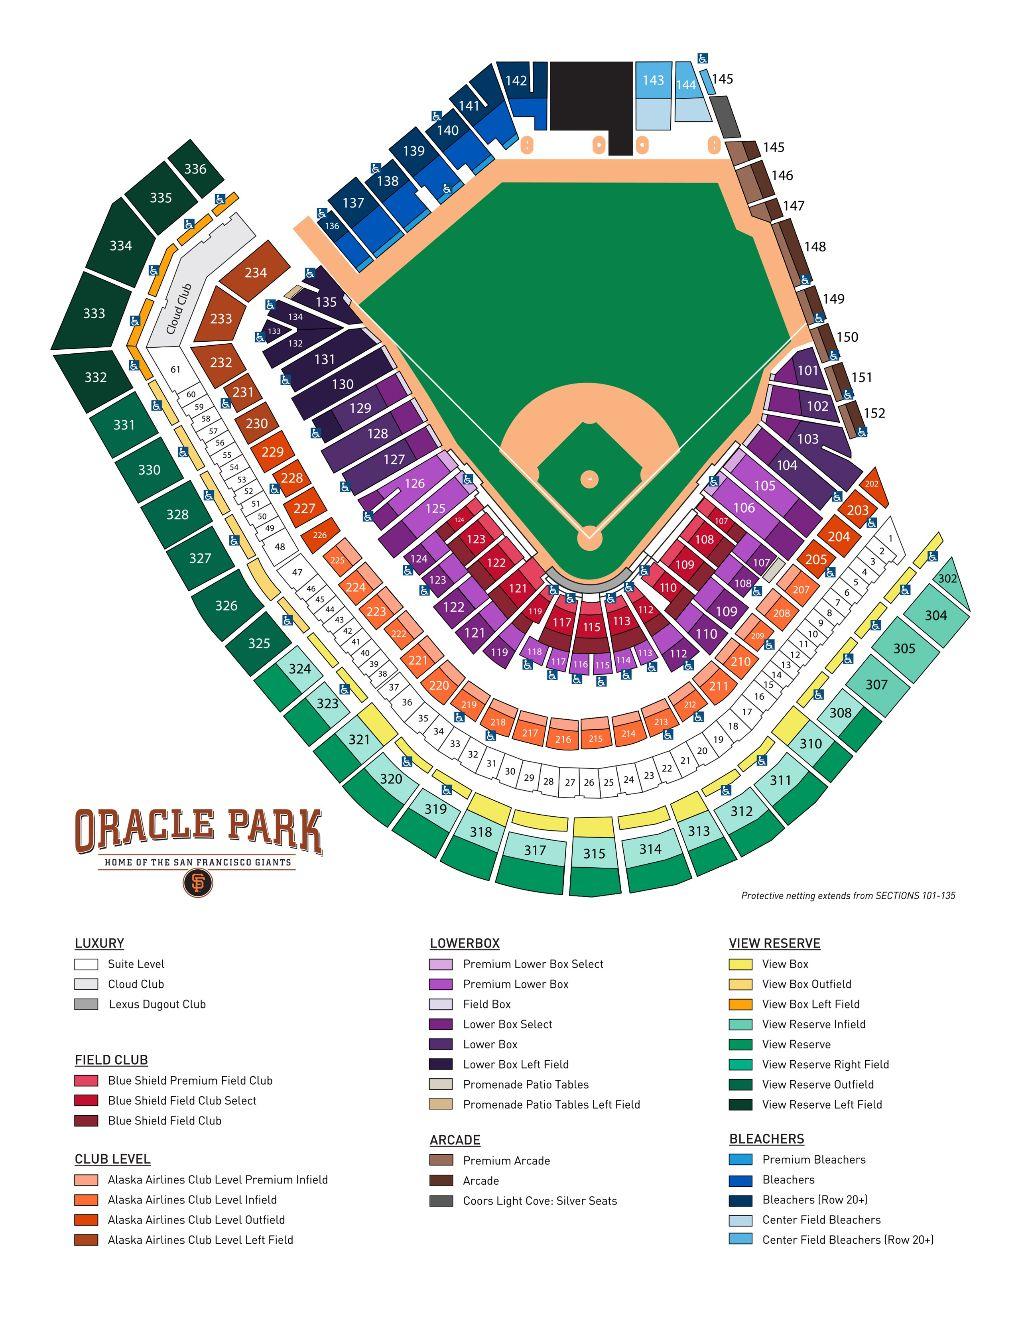 4 Tickets to SF Giants vs. CHI Cubs on Tuesday June 25th @ 6:45pm